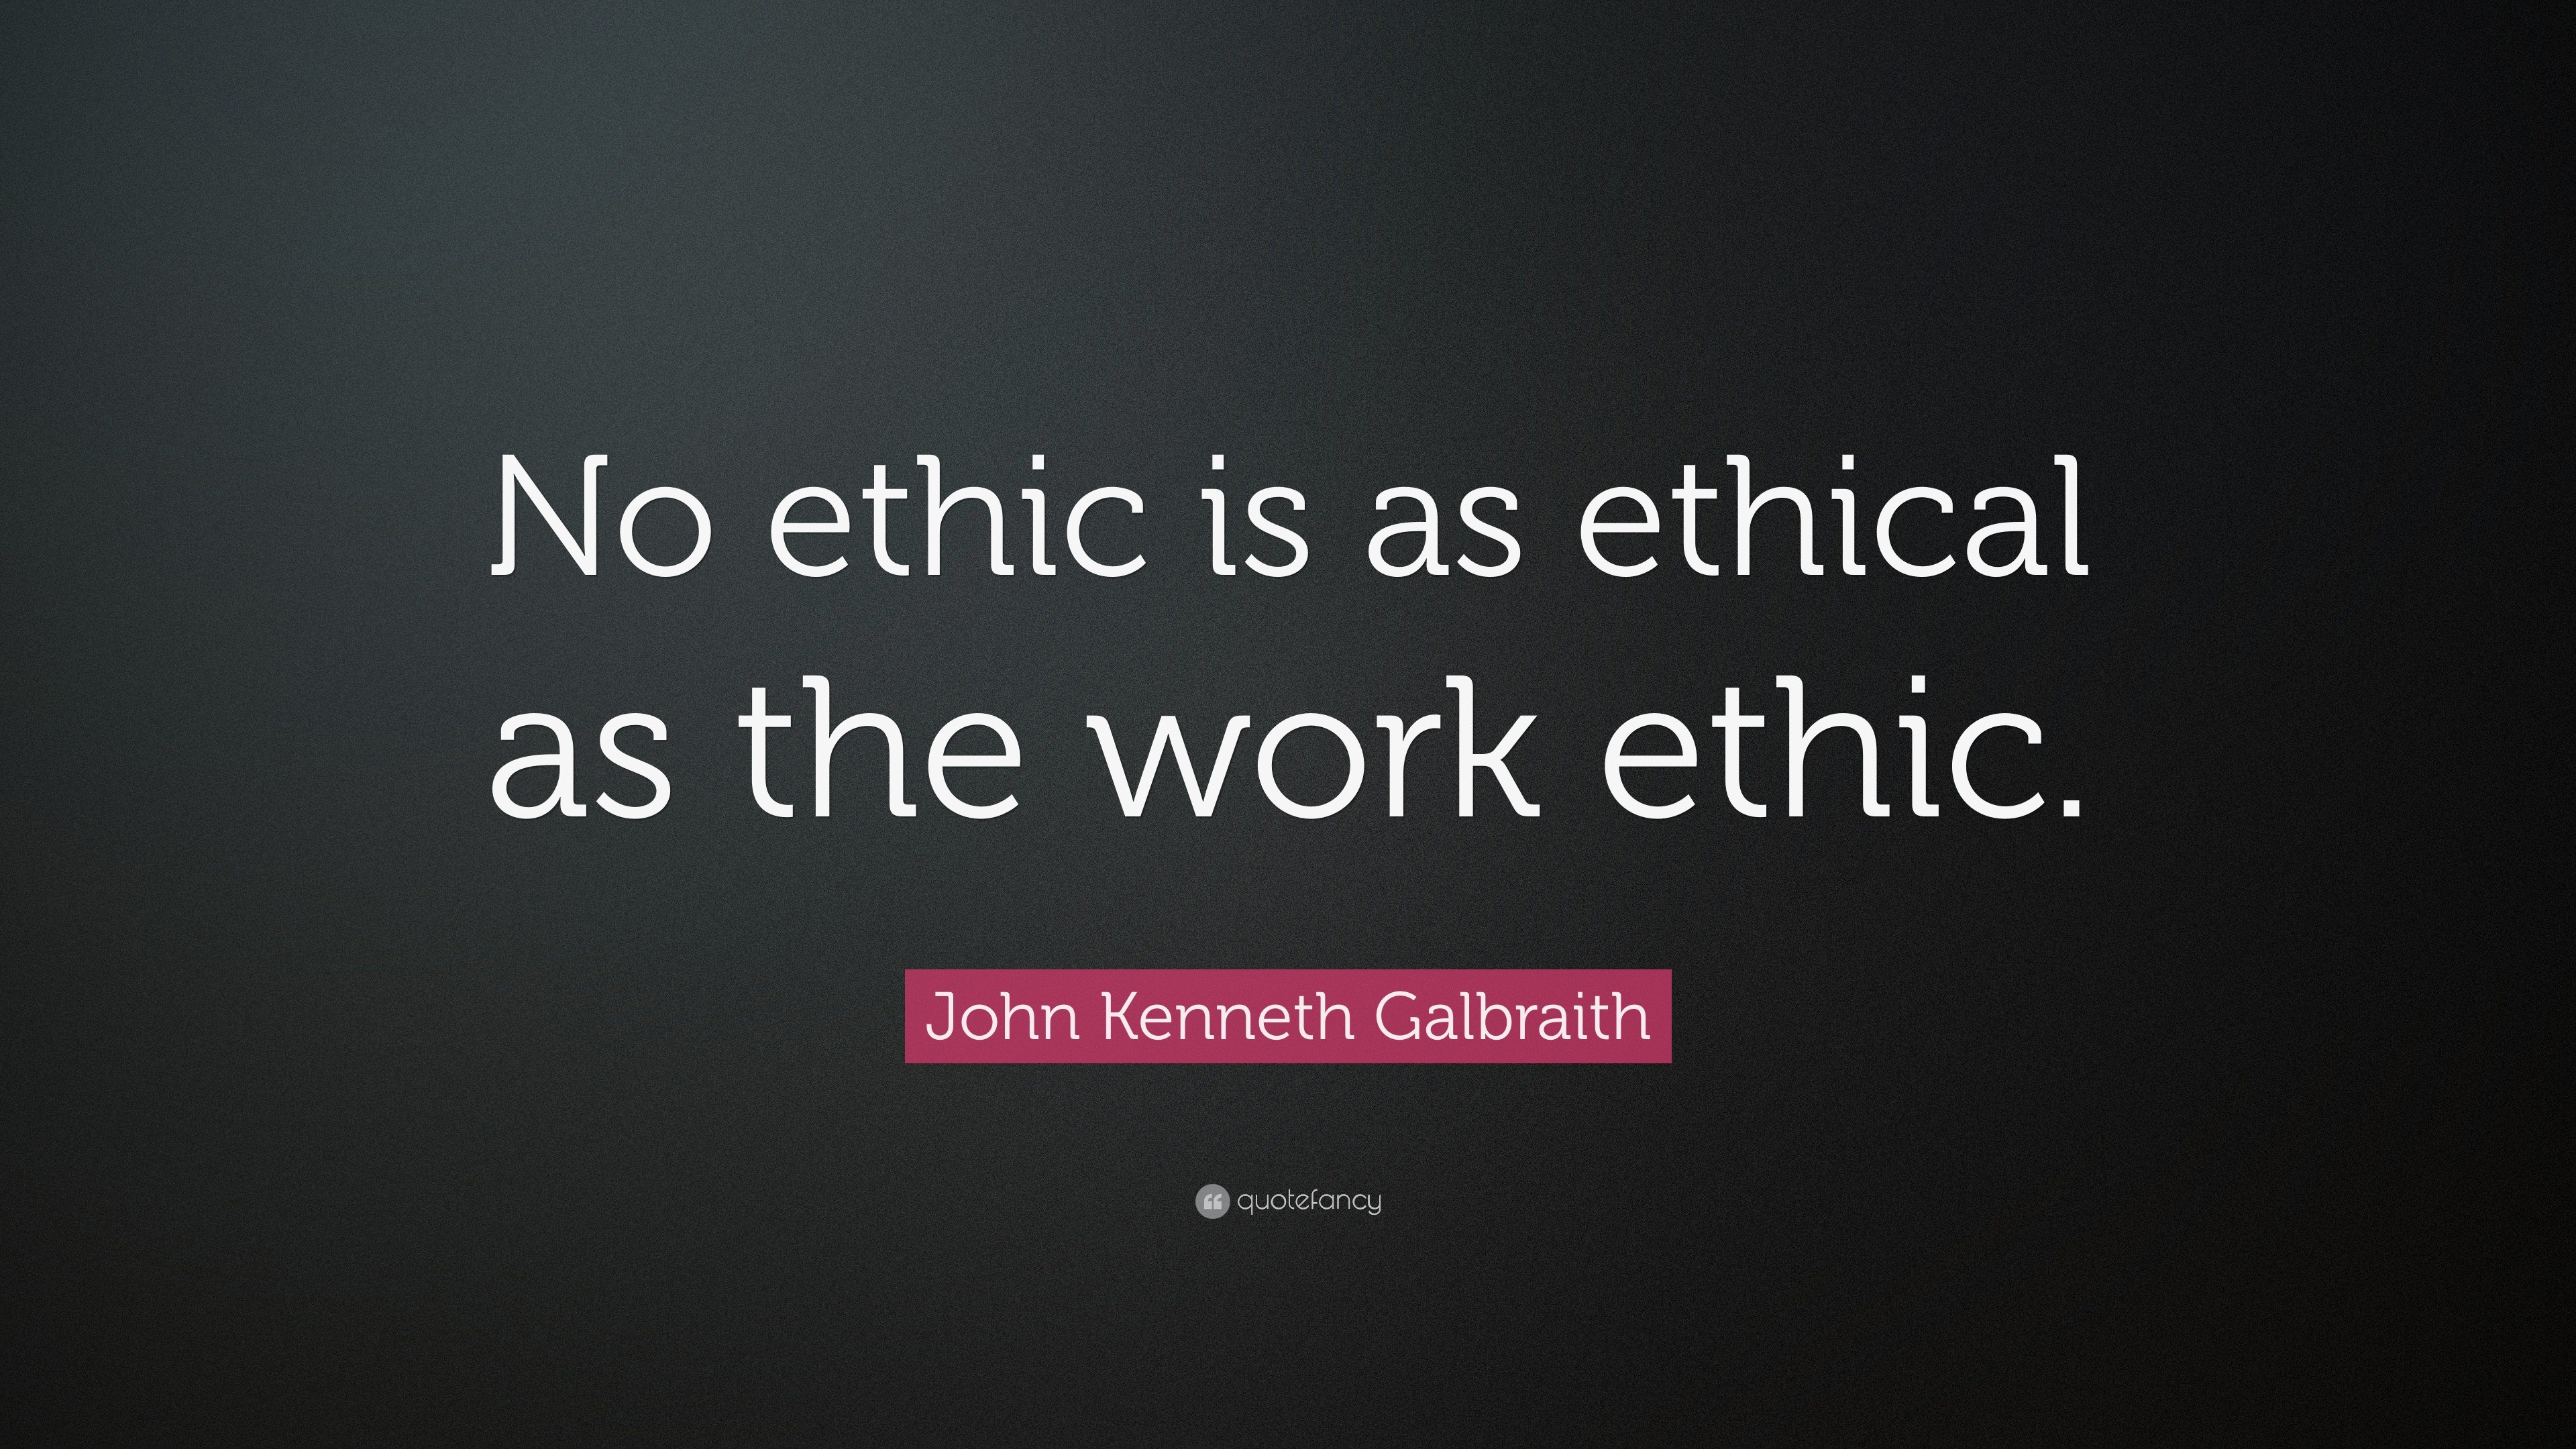 John Kenneth Galbraith Quote: “No ethic is as ethical as the work ethic